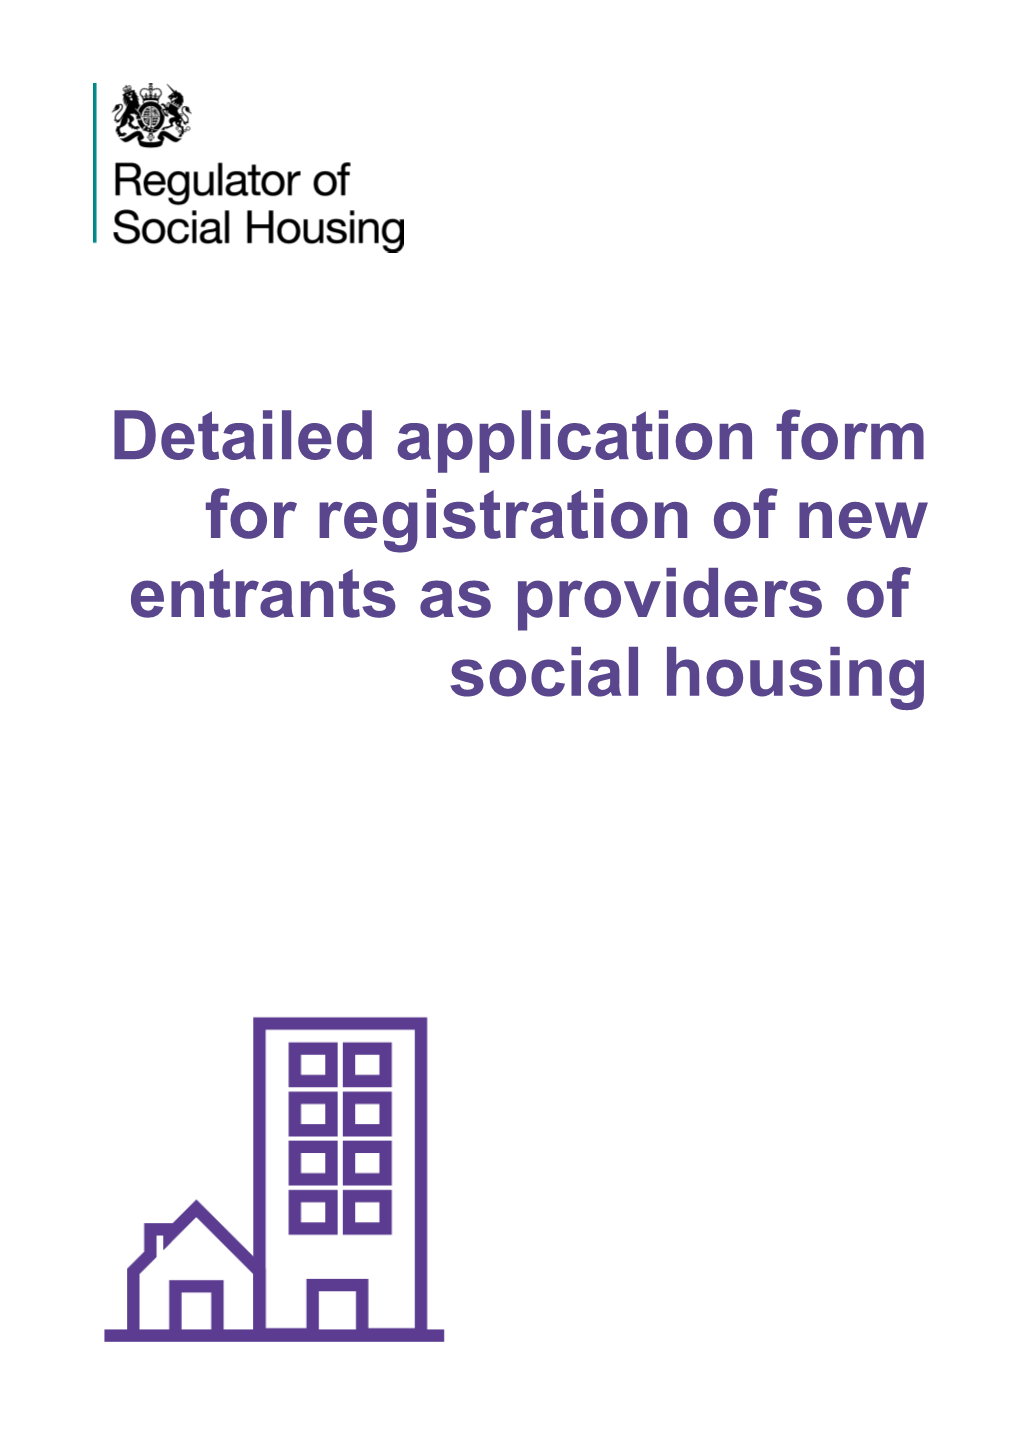 Detailed Application Form for Registration of New Entrants As Providers of Social Housing